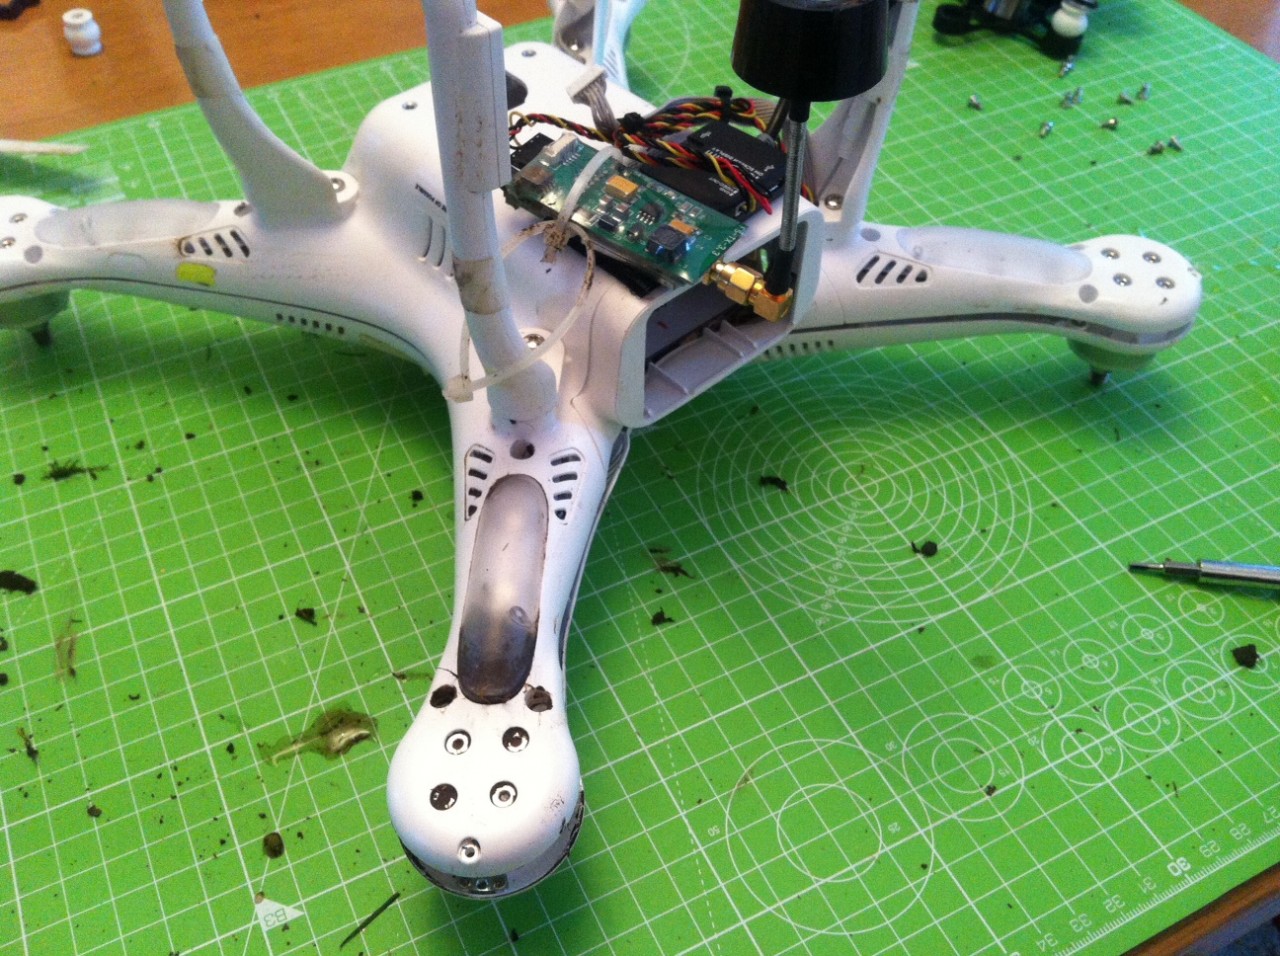 Crashed Phantom 2 Repairs - What I learned may help you.